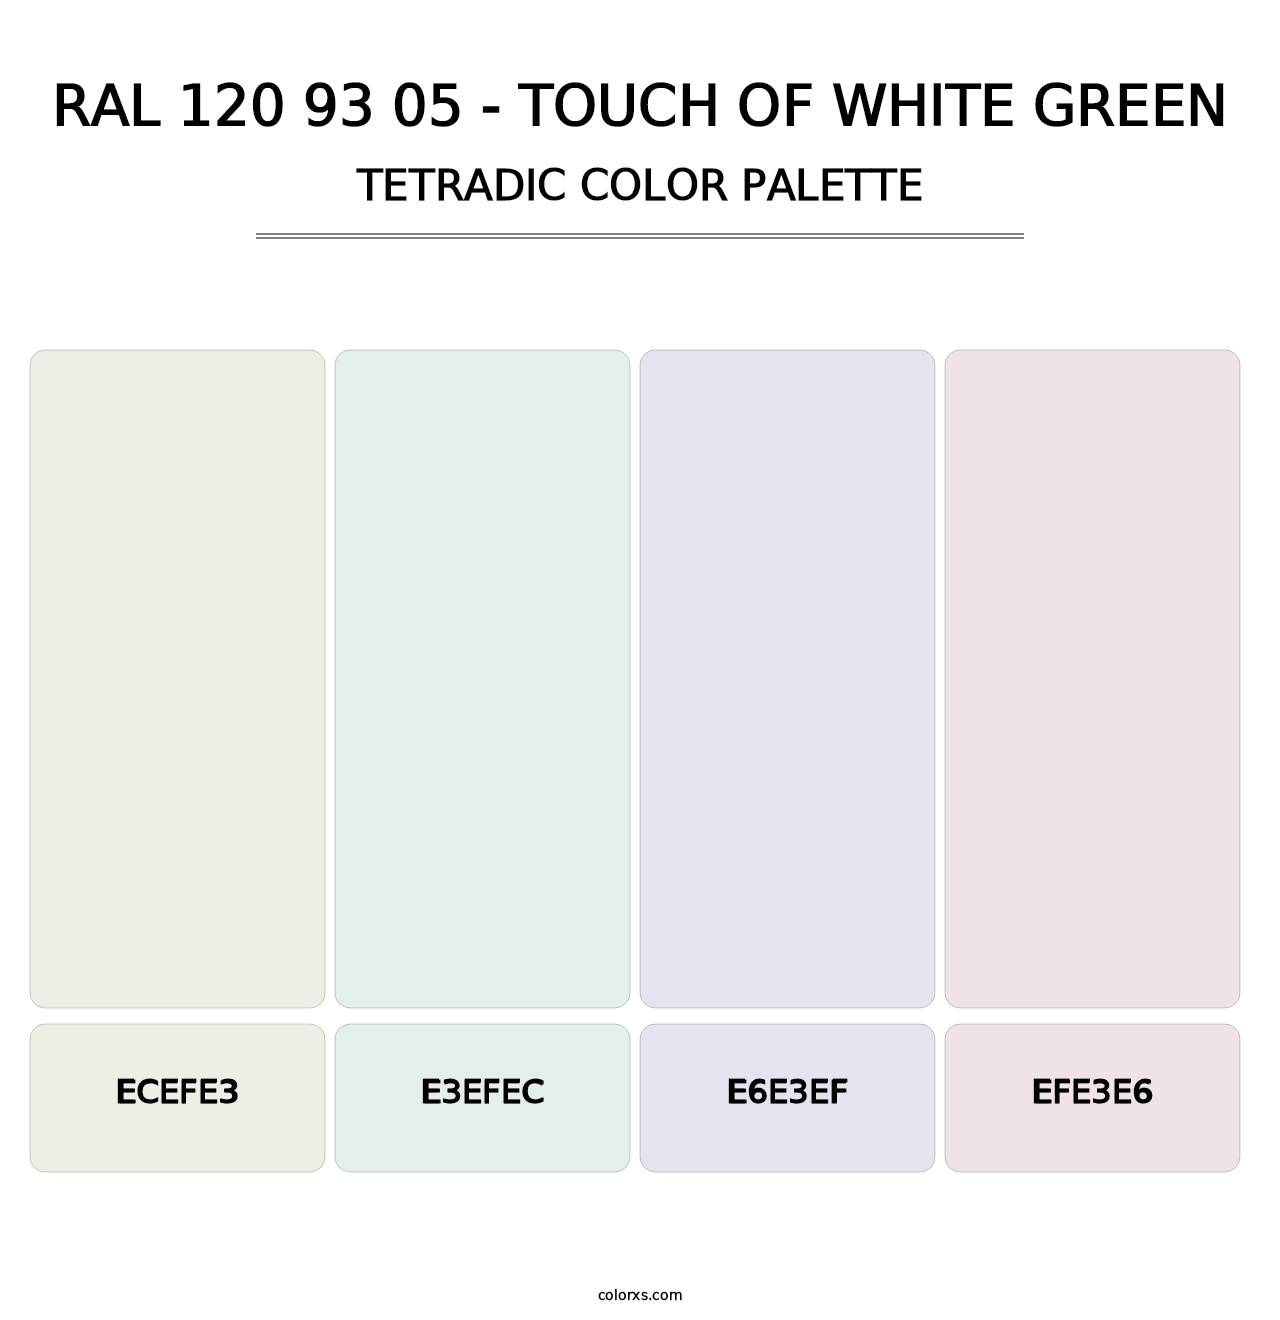 RAL 120 93 05 - Touch Of White Green - Tetradic Color Palette